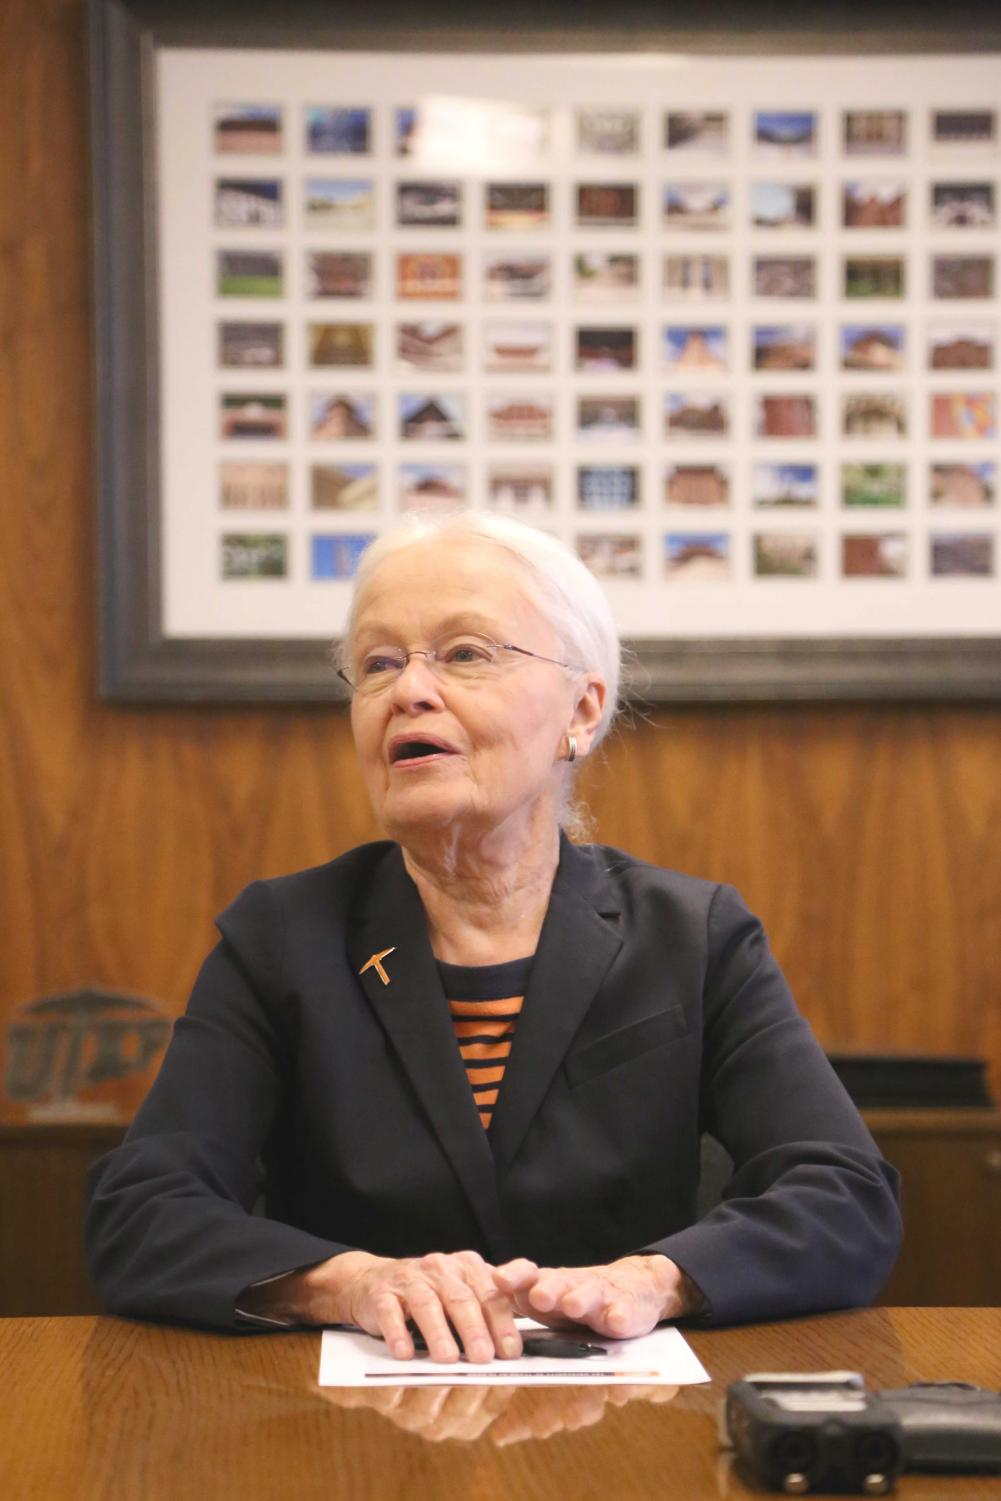 UTEP+President+speaks+about+retirement+plans+and+her+hopes+for+UTEPs+future